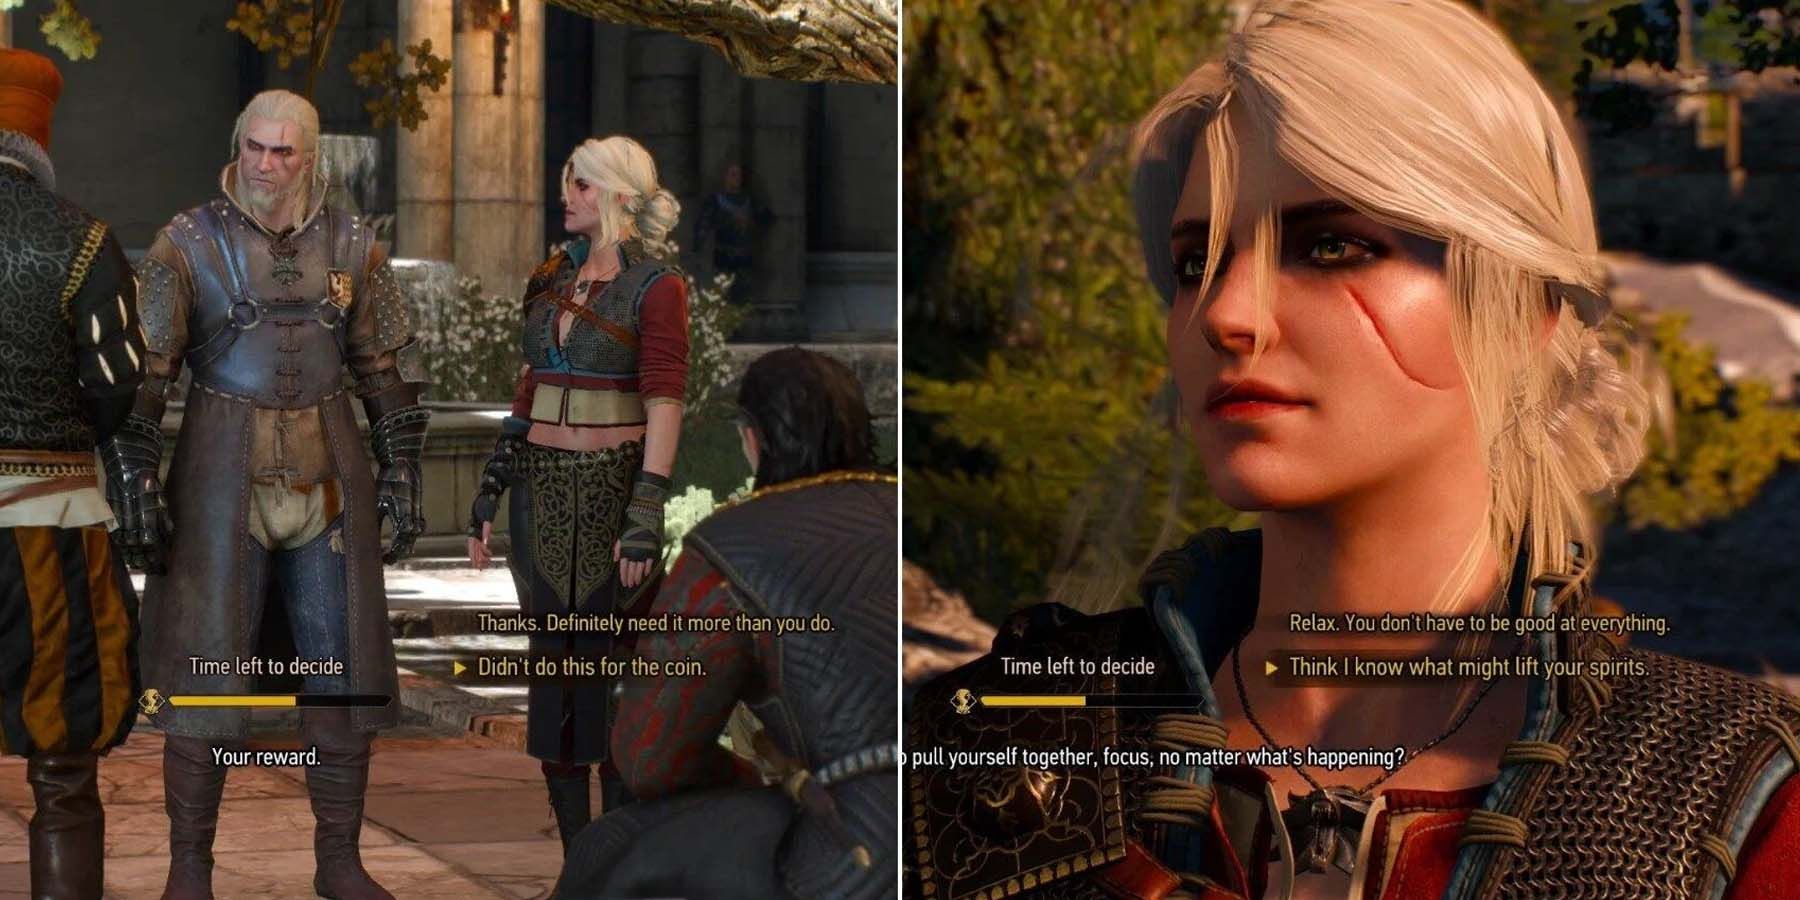 The Witcher 3 12 Mistakes Players Make That Cost Them The Good Ending In The Main Game featured image